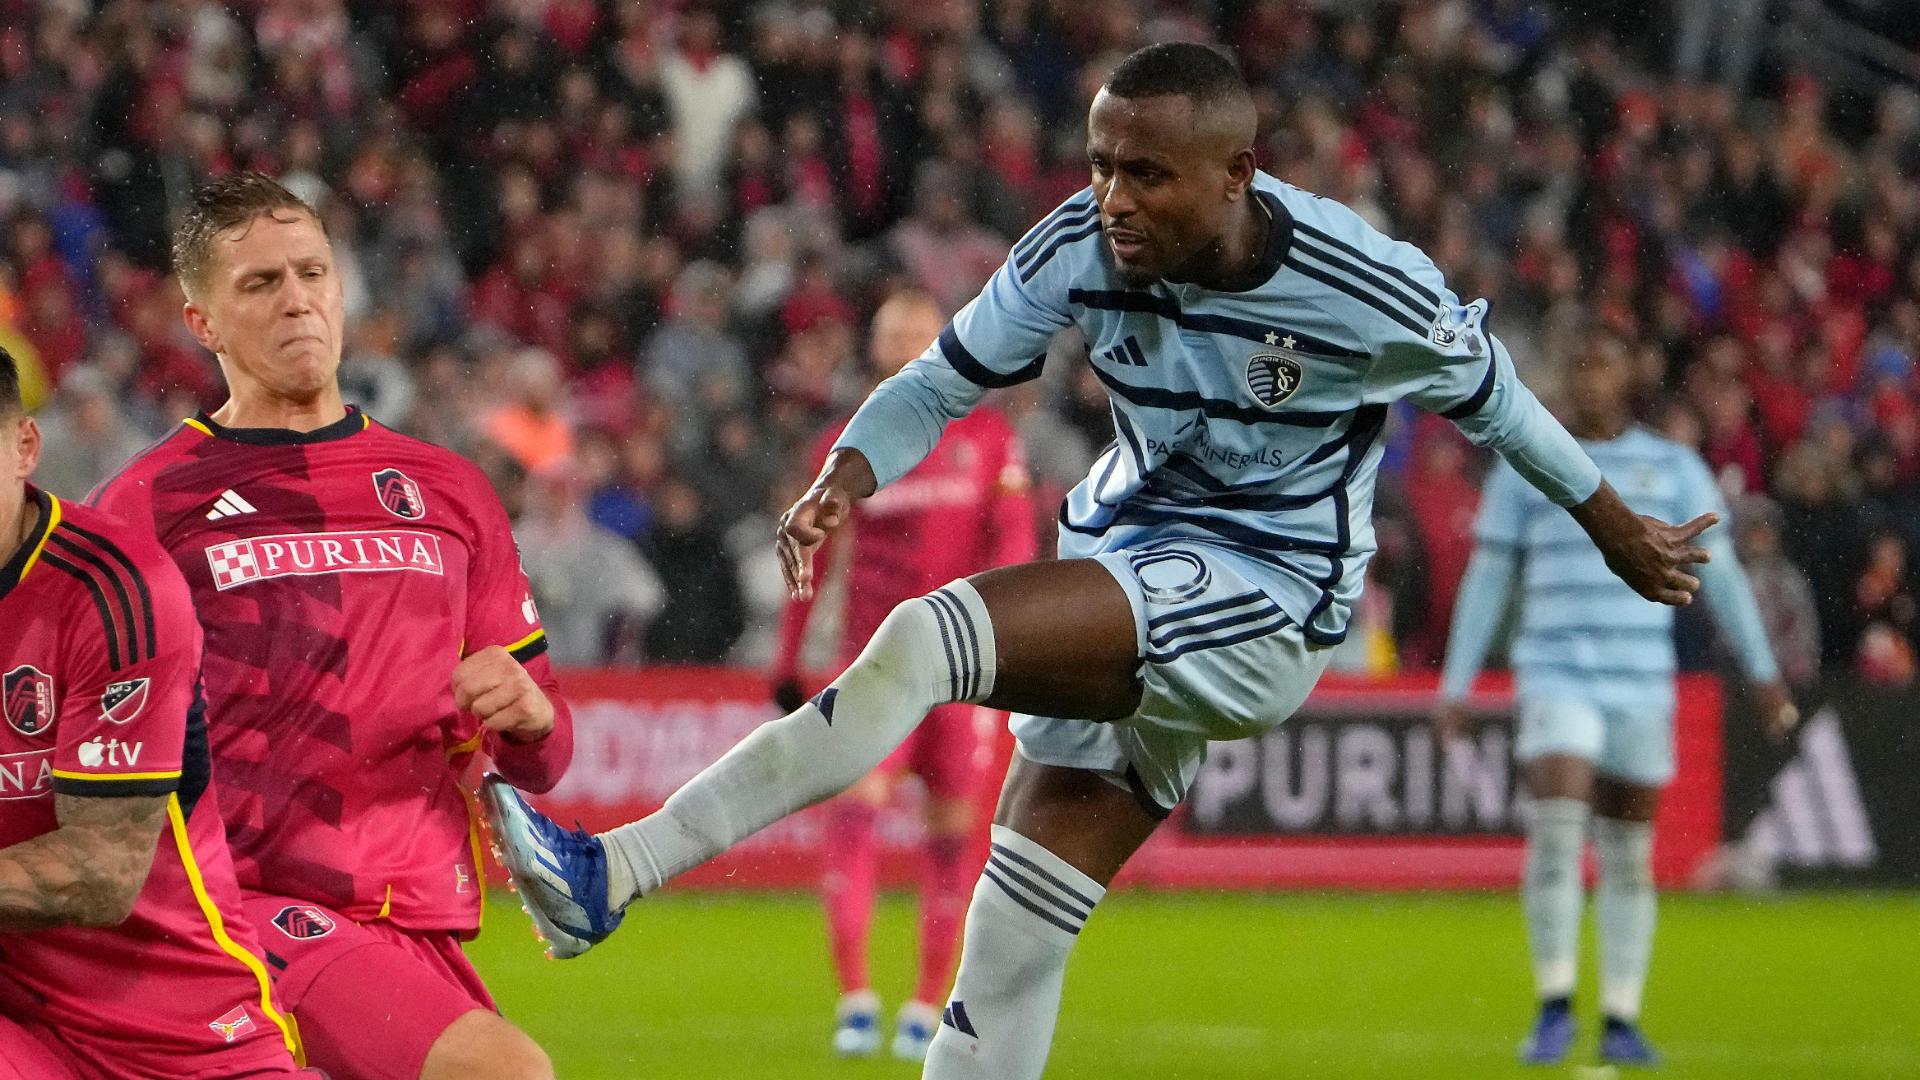 Match Preview: Sporting KC hosts St. Louis CITY SC on Saturday in